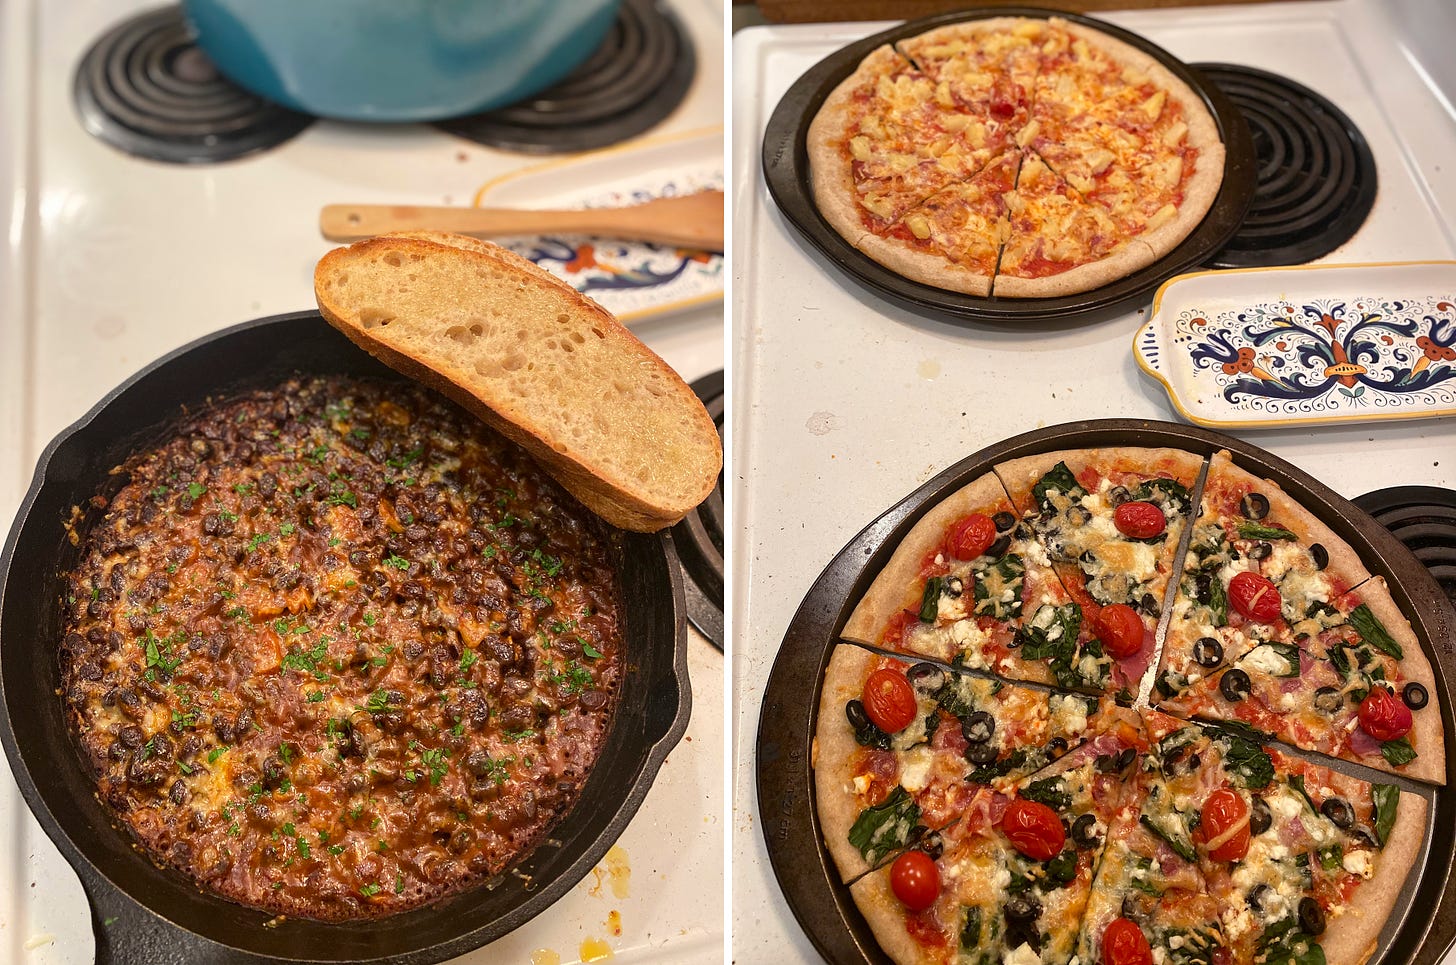 Left image: a cast iron pan of black beans with cheese and parsley on top, and two slices of sourdough at the edge of the pan. Right image: two pans of pizza on top of the stove, one with ham & pineapple, the other with kale, tomato, and olives. 